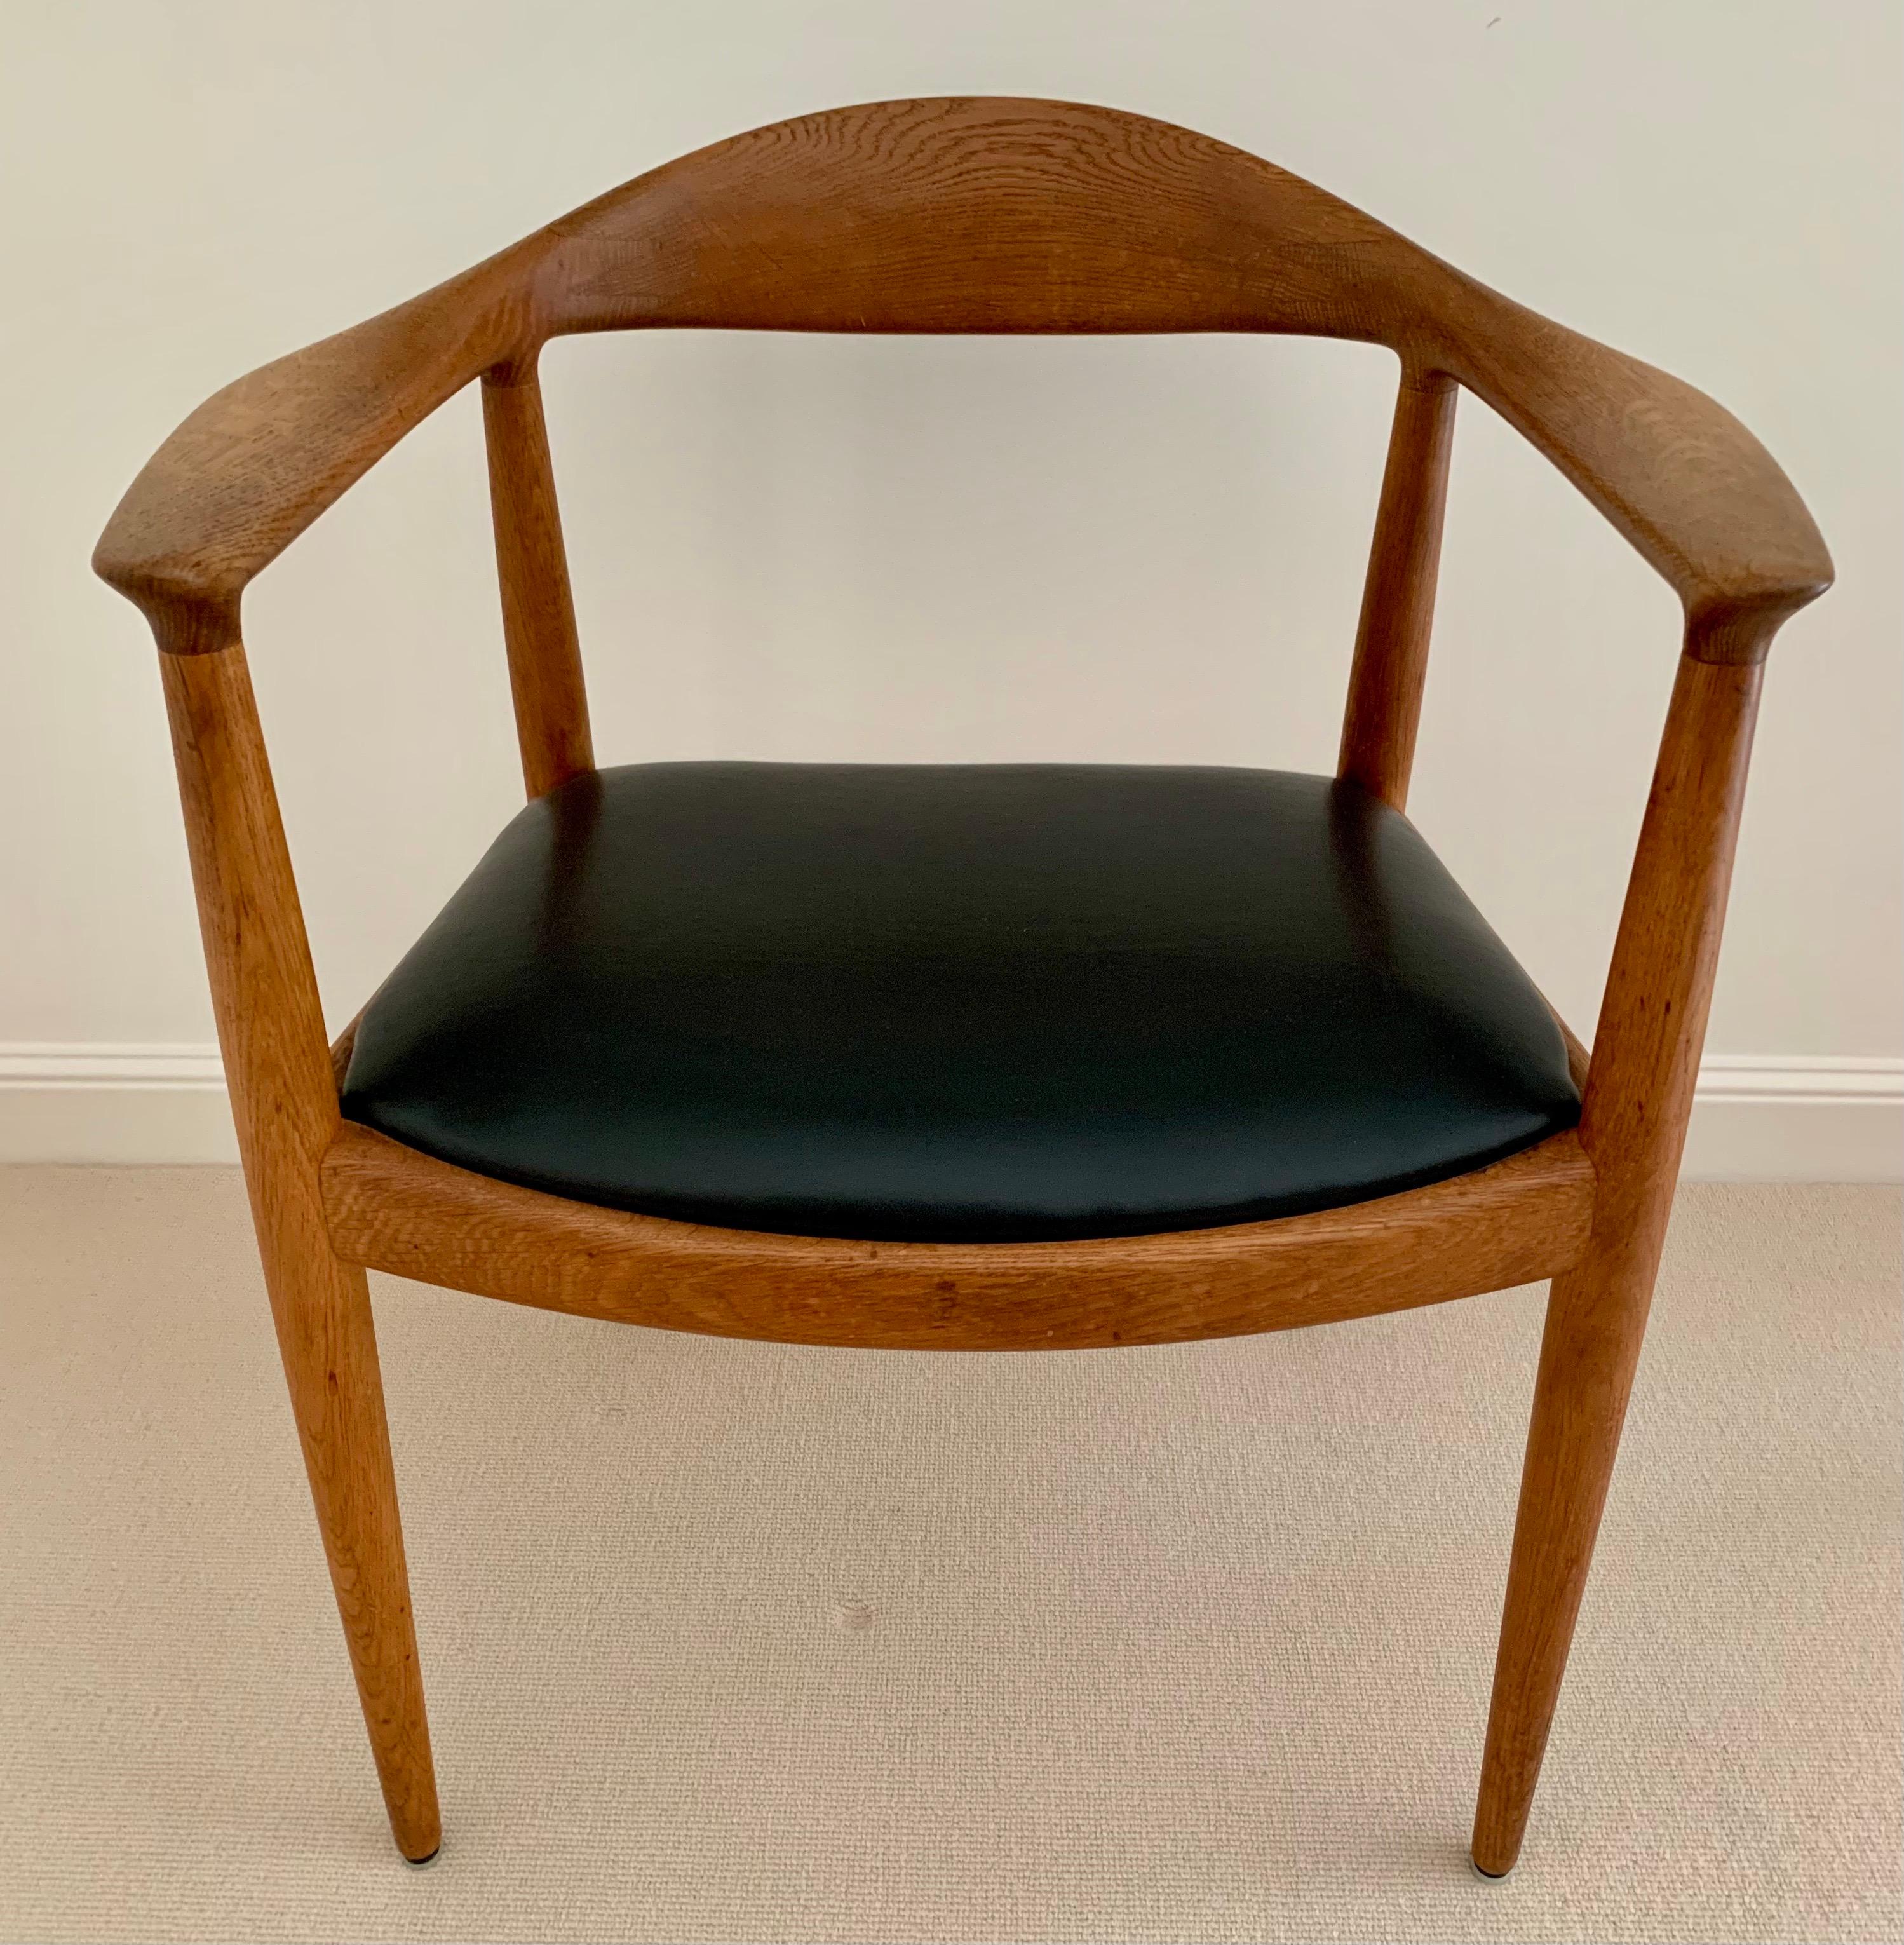 The round back or “The Chair” was designed by Hans Wegner and exquisitely constructed by cabinet maker Johannes Hansen. It’s subtle beauty is matched by it’s comfort and epitomizes the best of Danish modern design. Signed with branded manufacturer’s